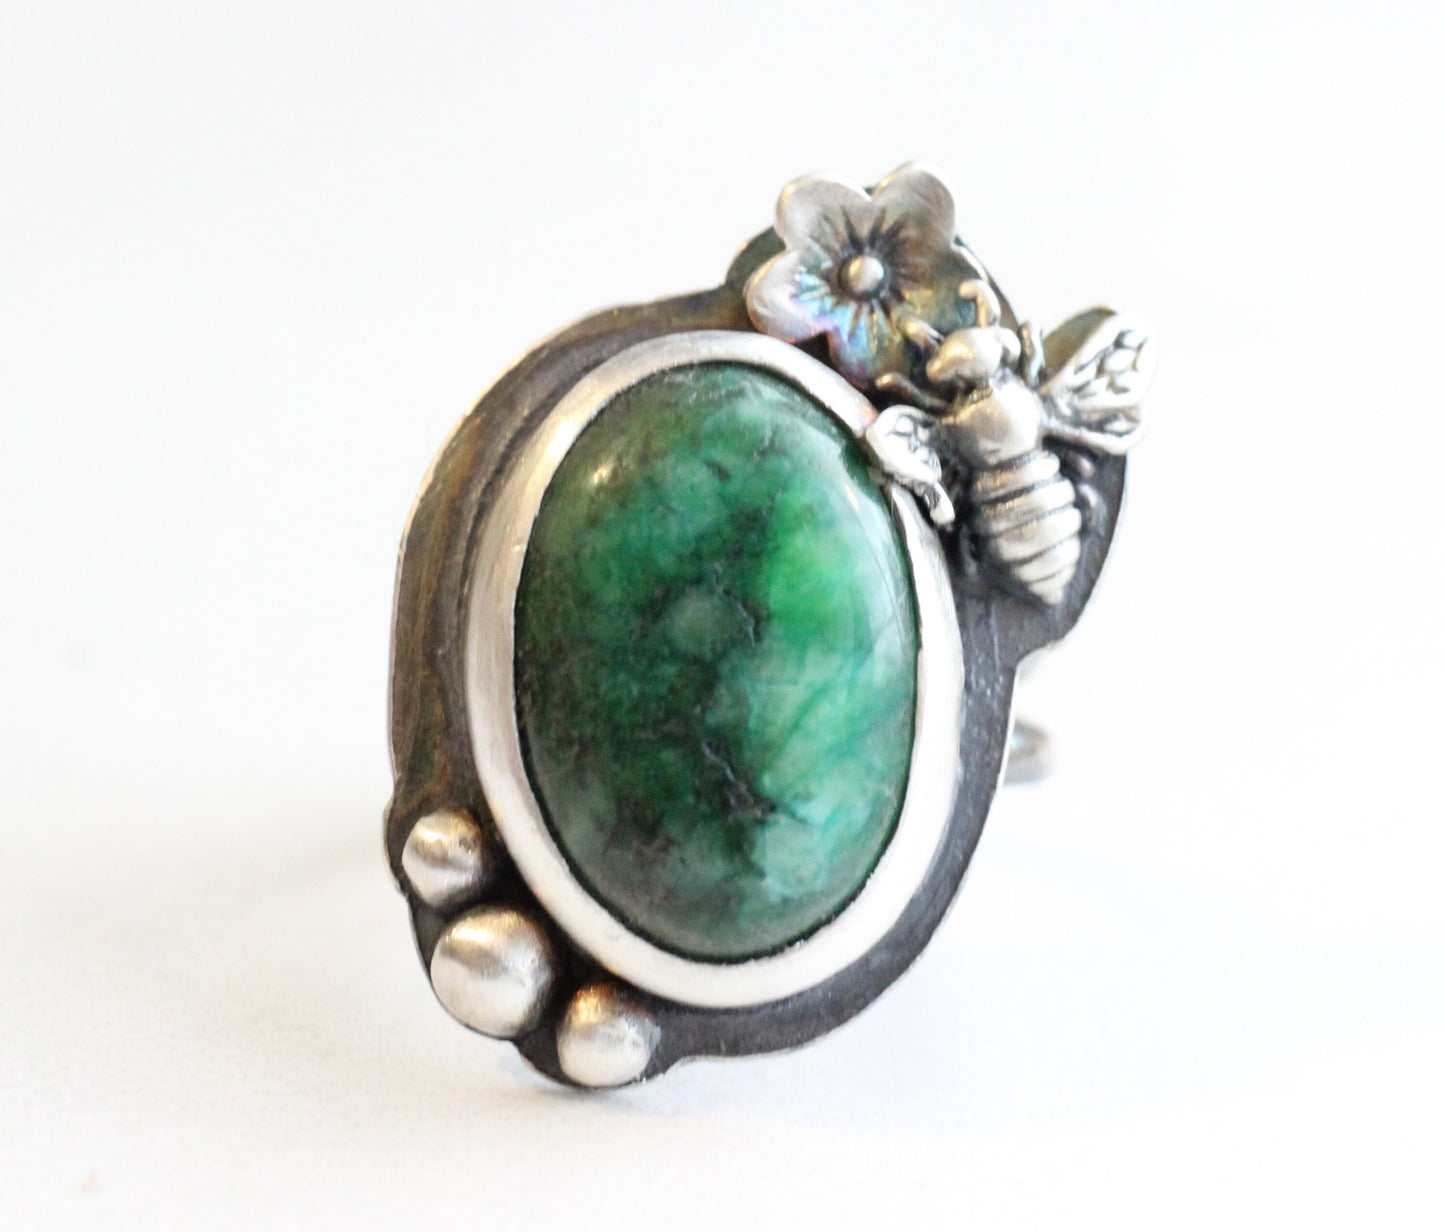 Jade Ring // Sterling Silver Green Jade Ring with Bumble Bee and Flower // Large Gemstone Ring